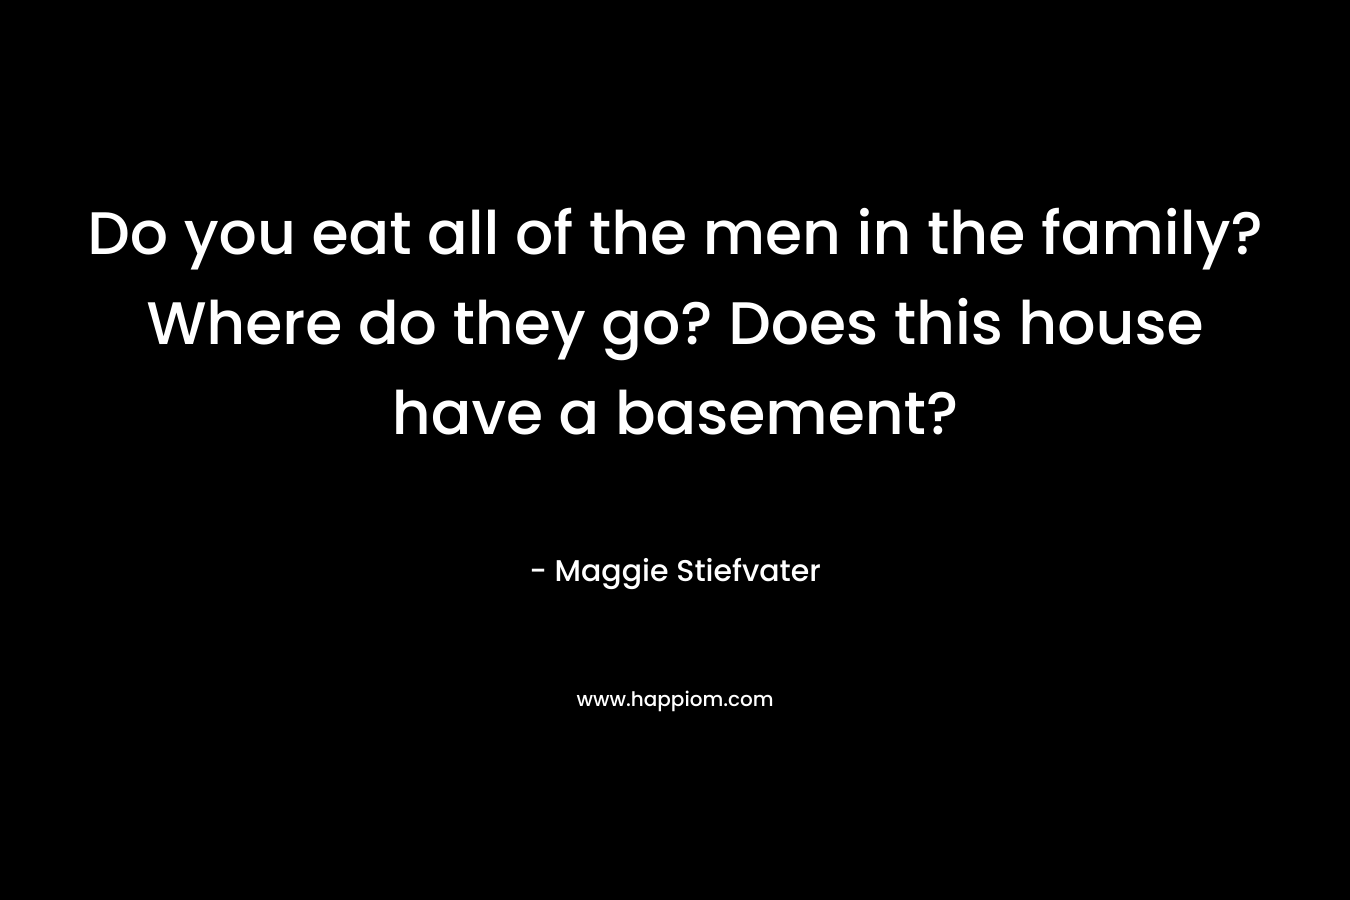 Do you eat all of the men in the family? Where do they go? Does this house have a basement?